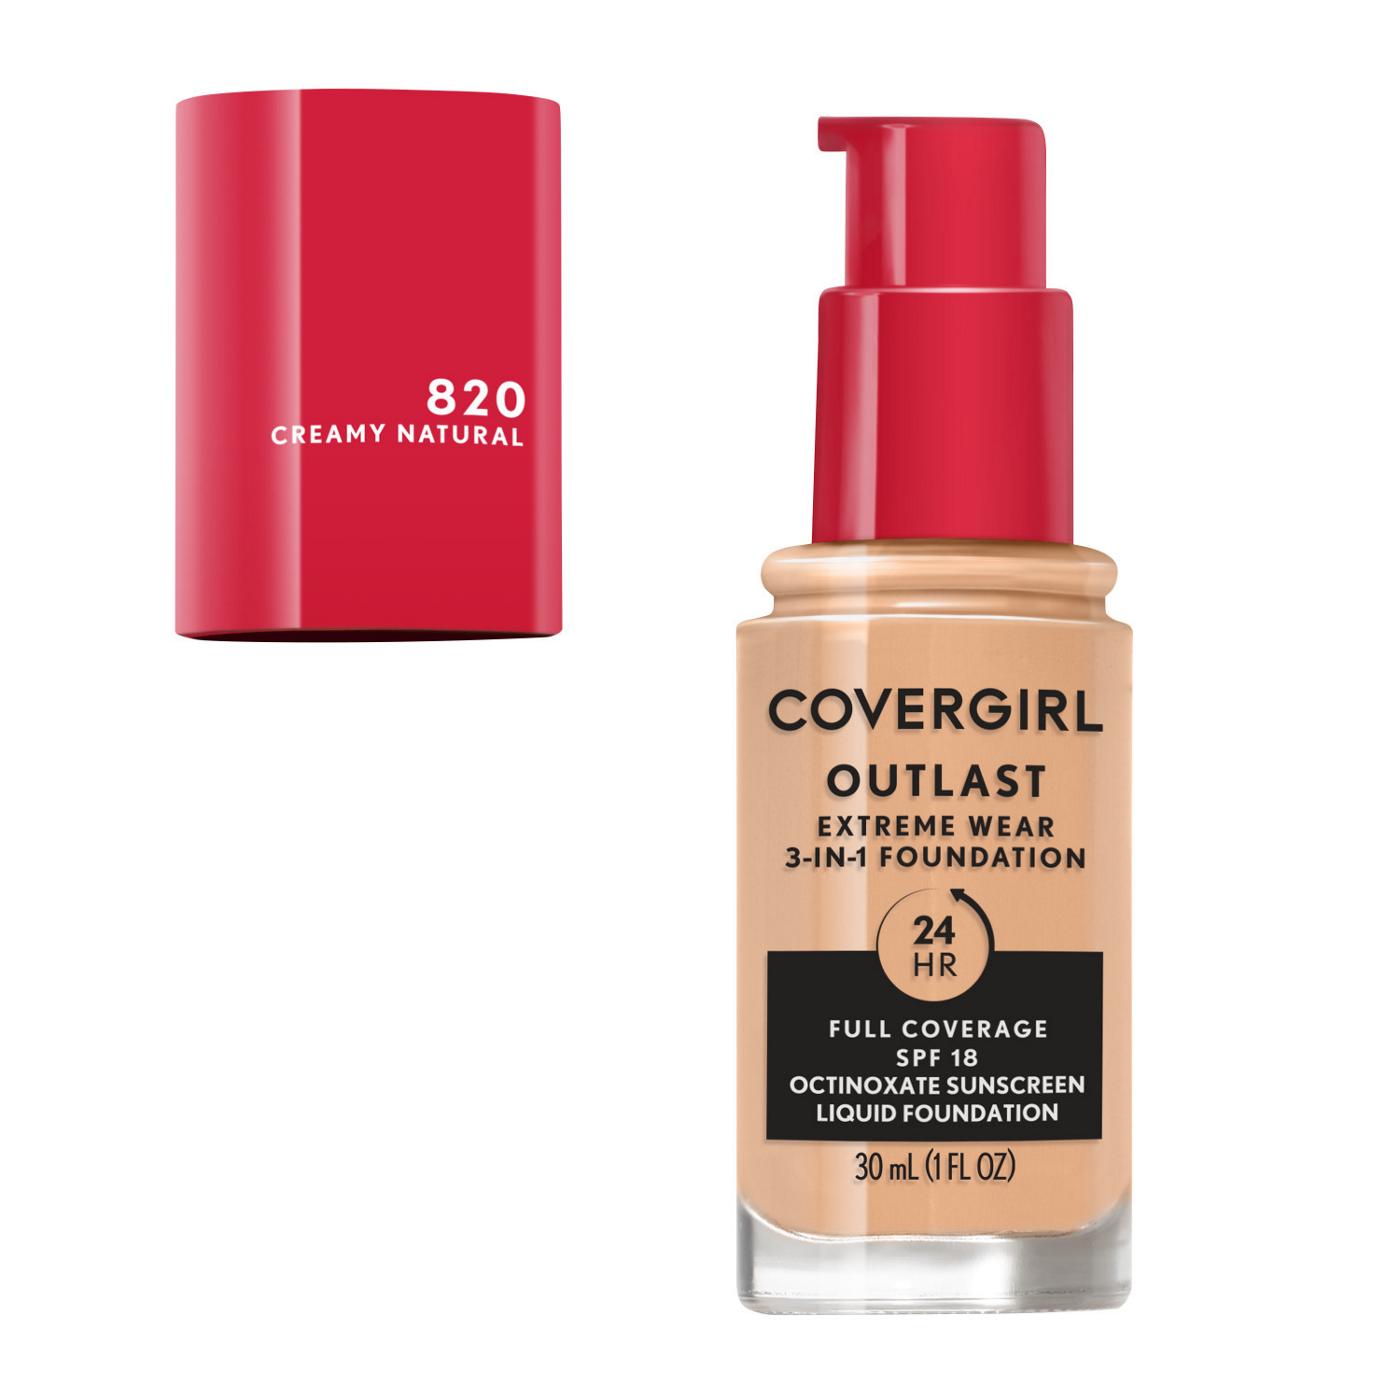 Covergirl Outlast Extreme Wear Liquid Foundation 820 Creamy Natural; image 3 of 11